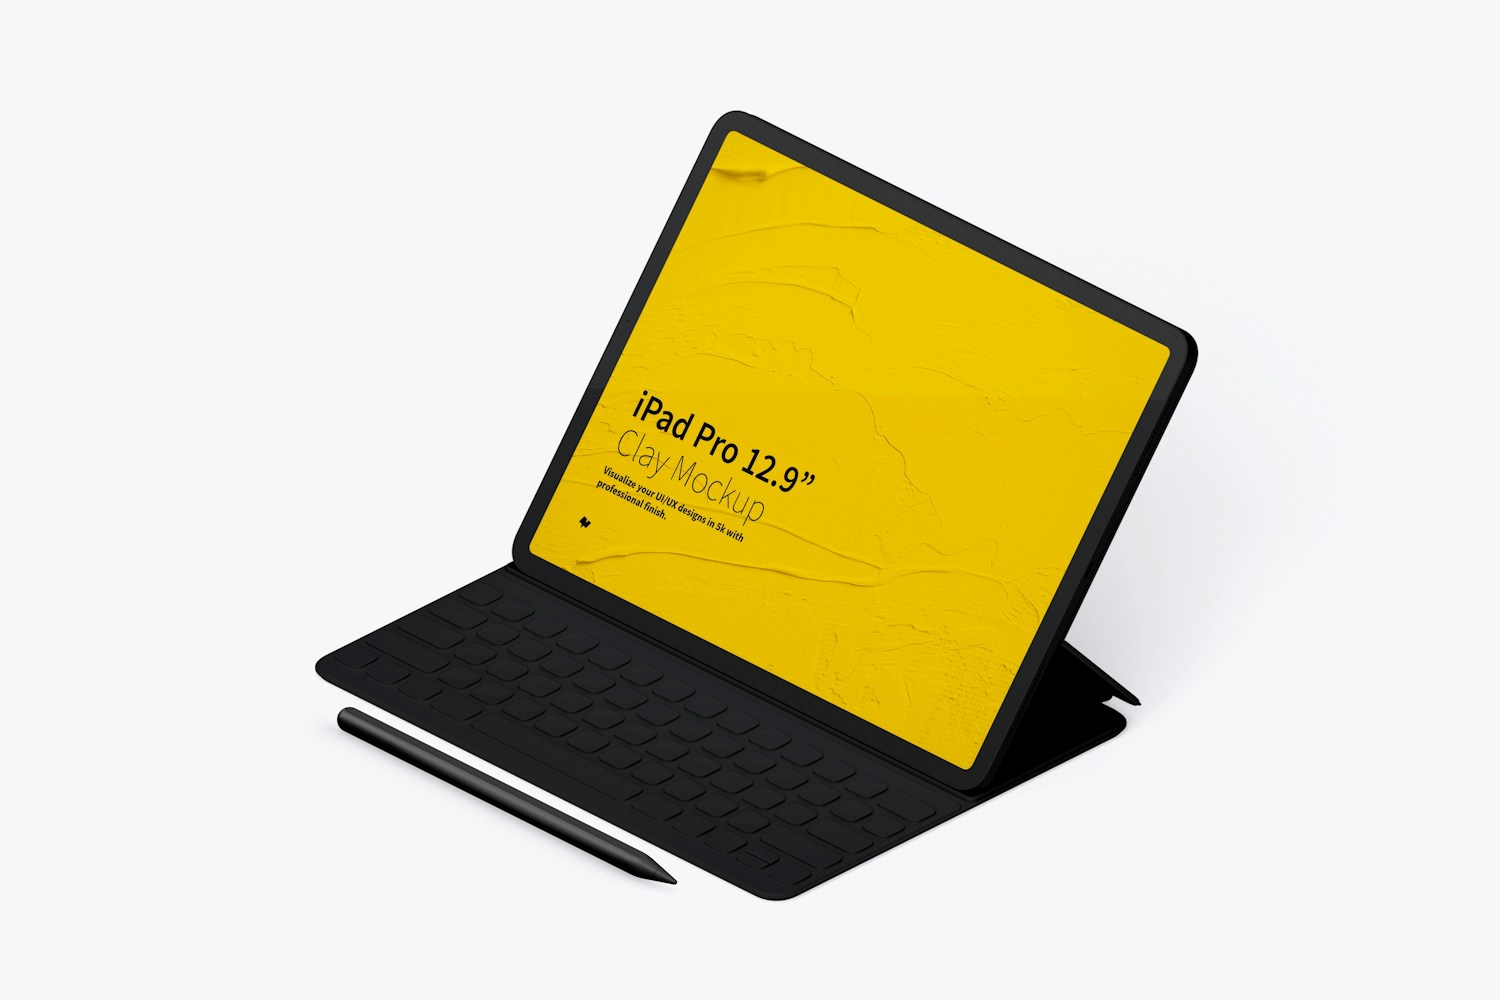 Clay iPad Pro 12.9” Mockup, Isometric Right View With Keyboard